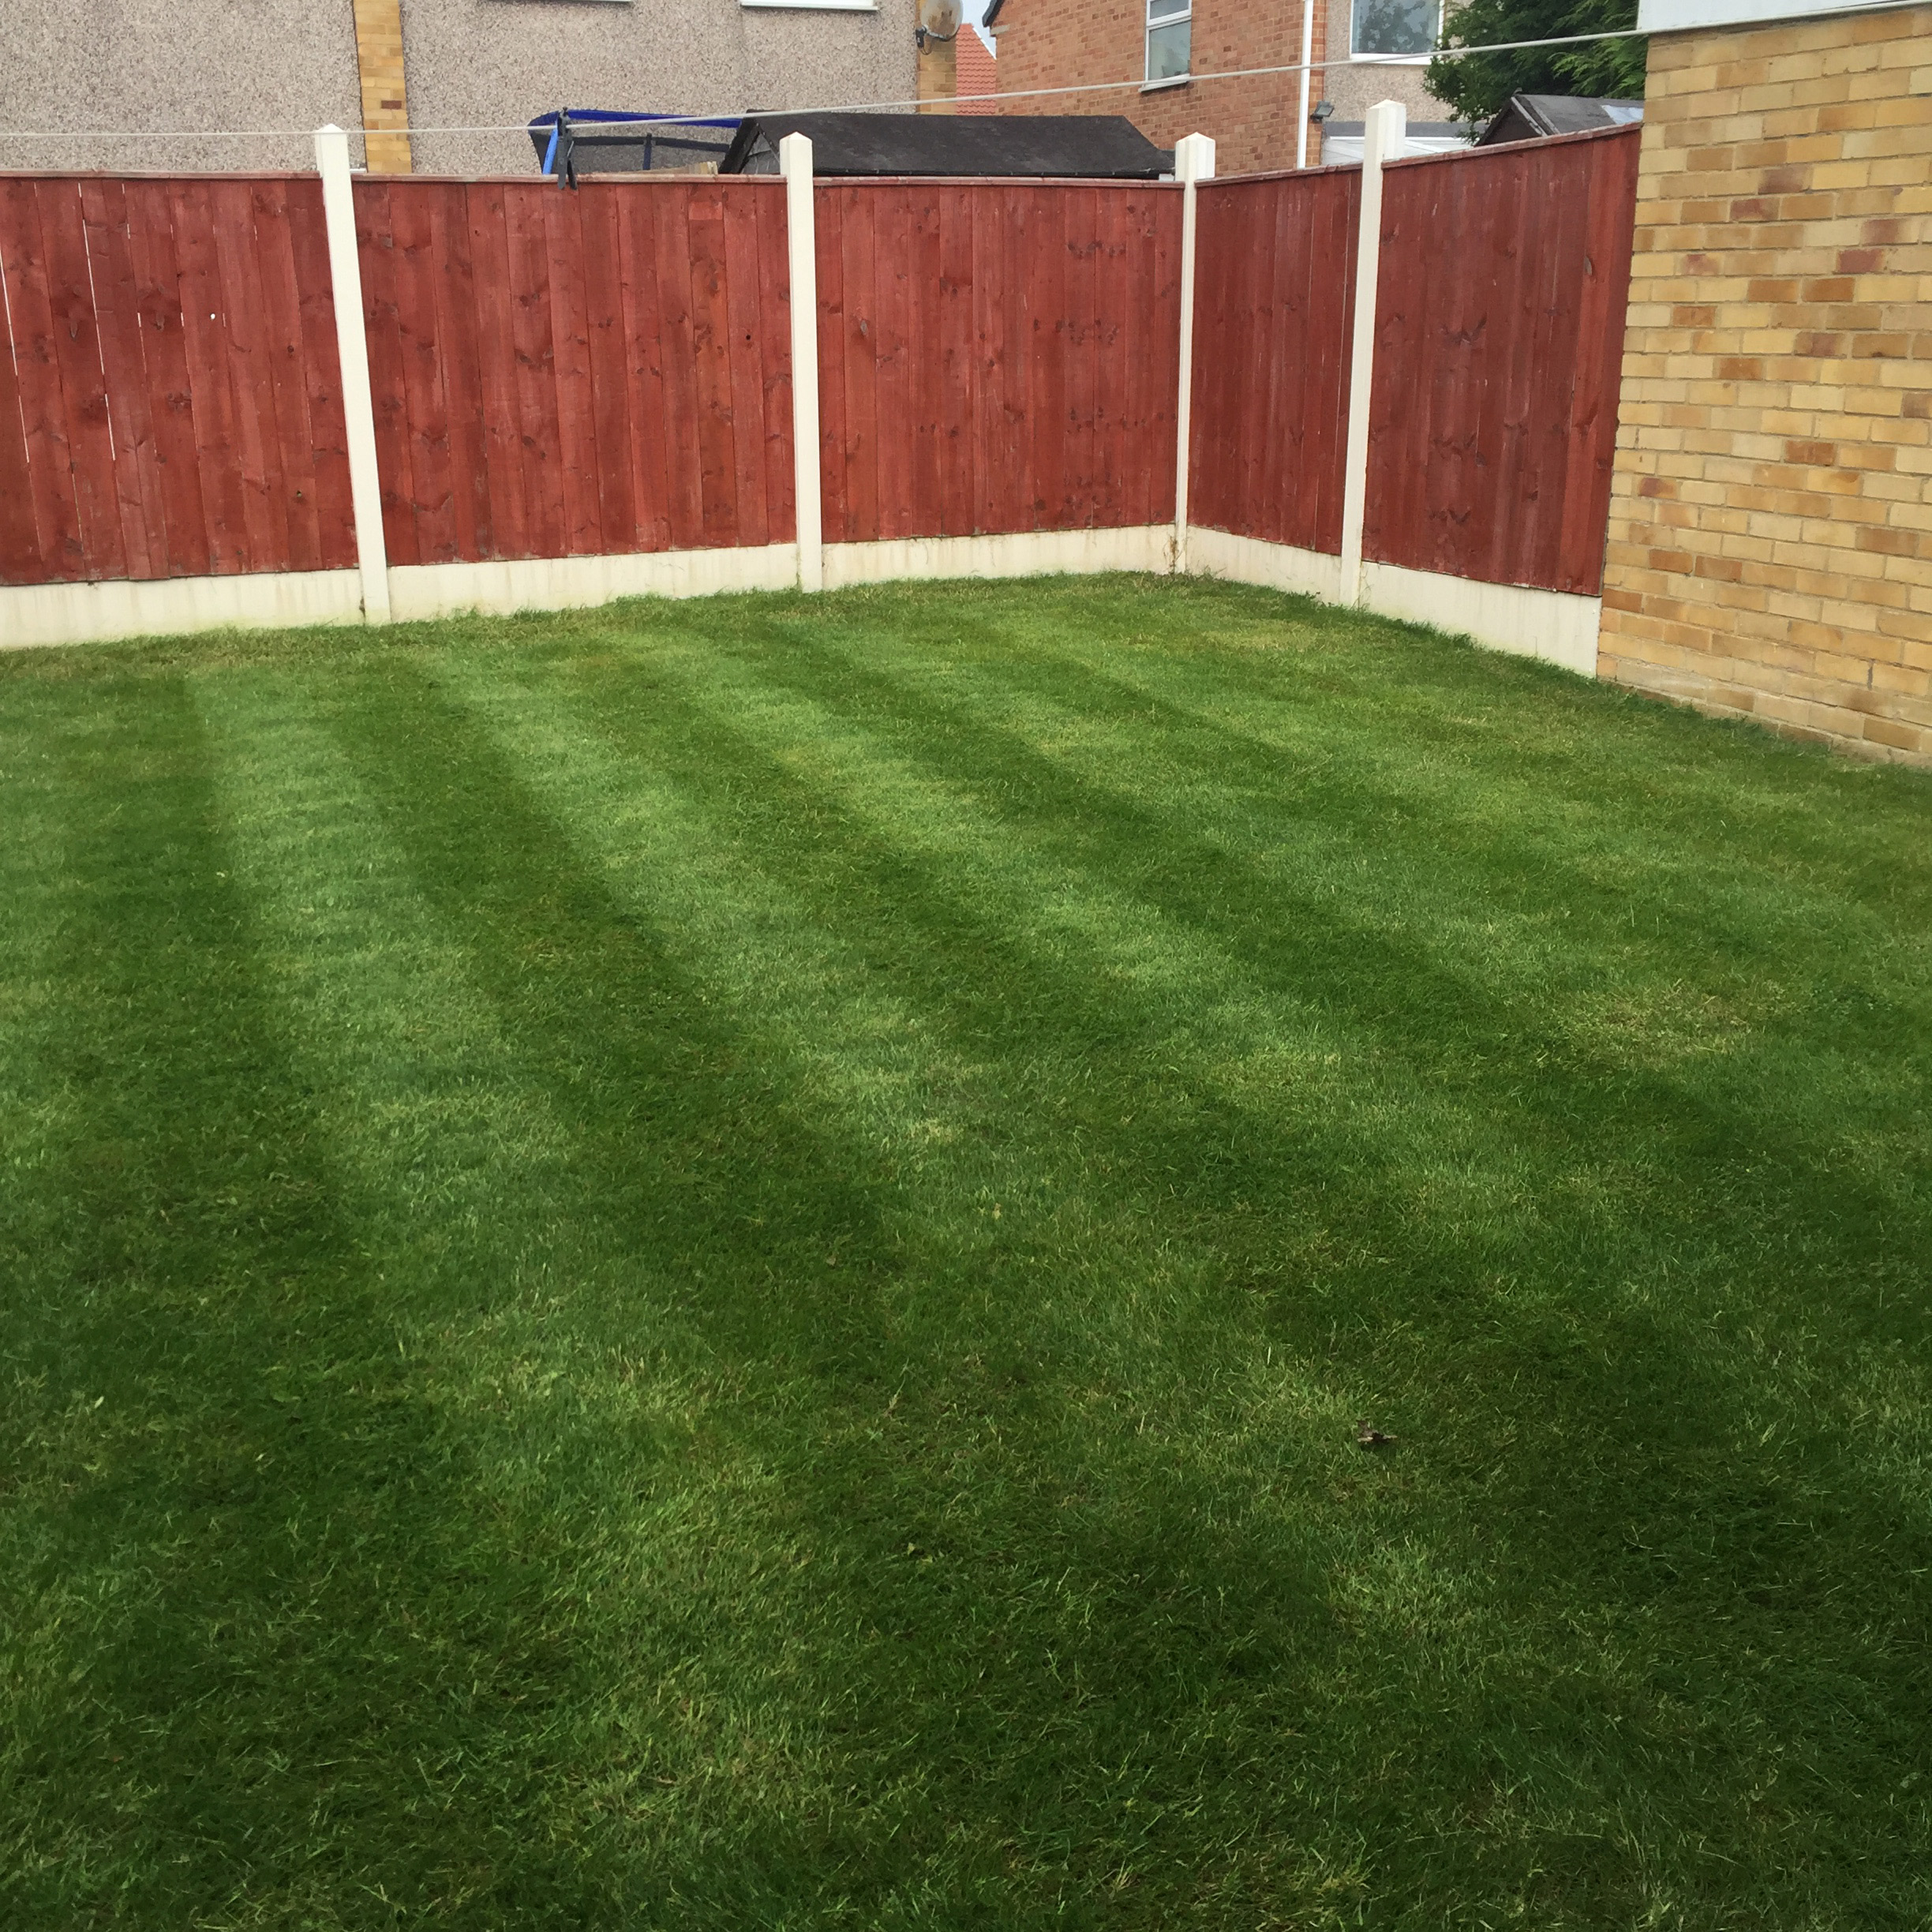 Expert Lawn Care in Teesside